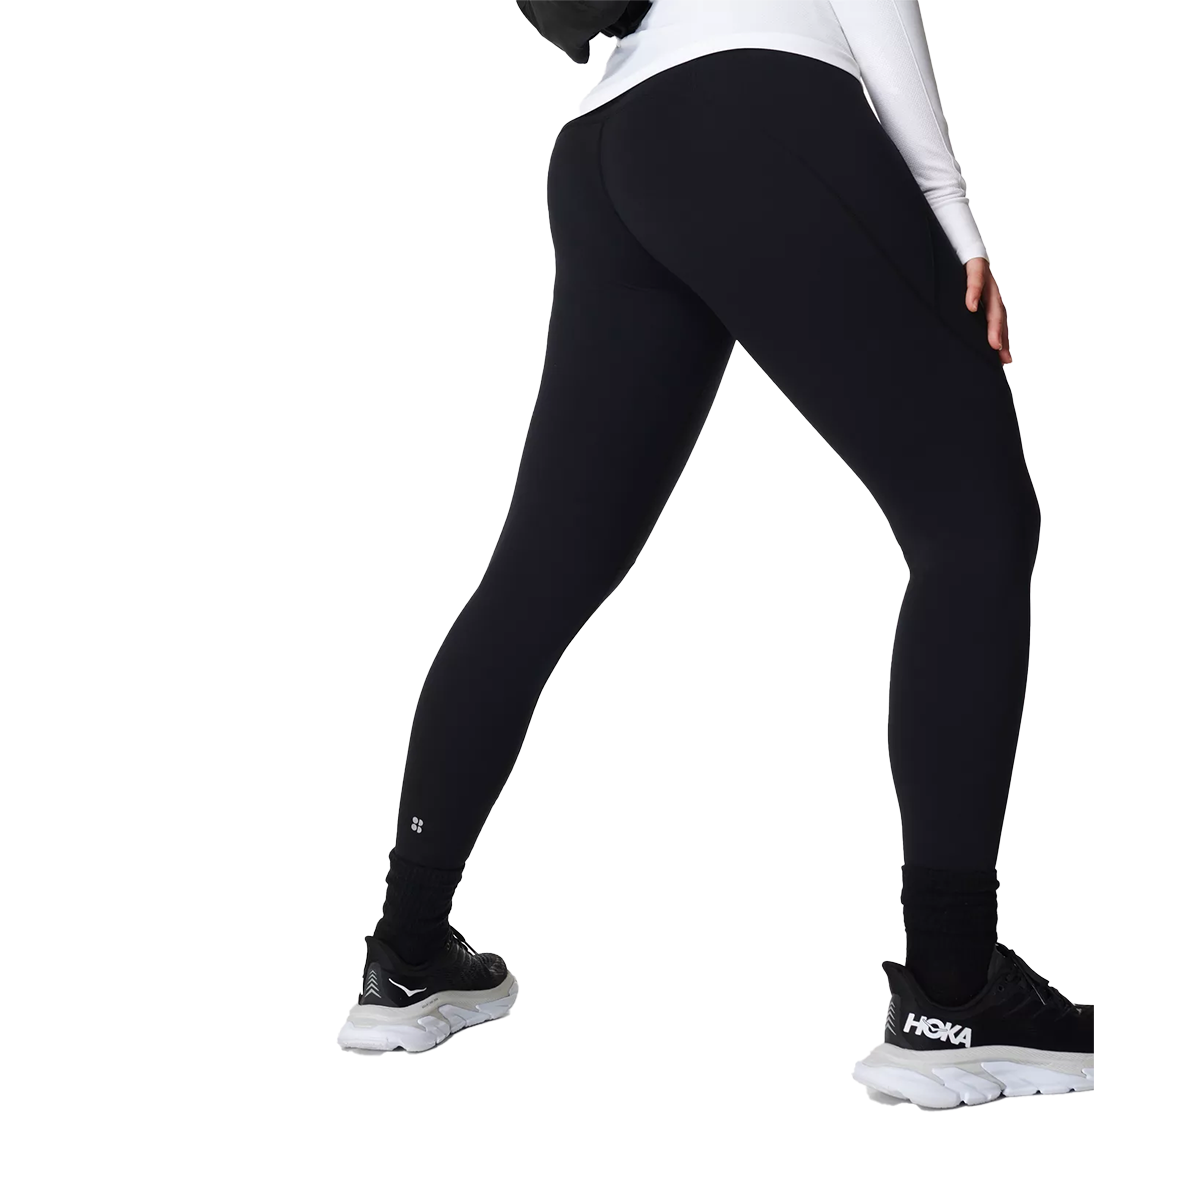 Sweaty Betty Power Workout Legging, , large image number null